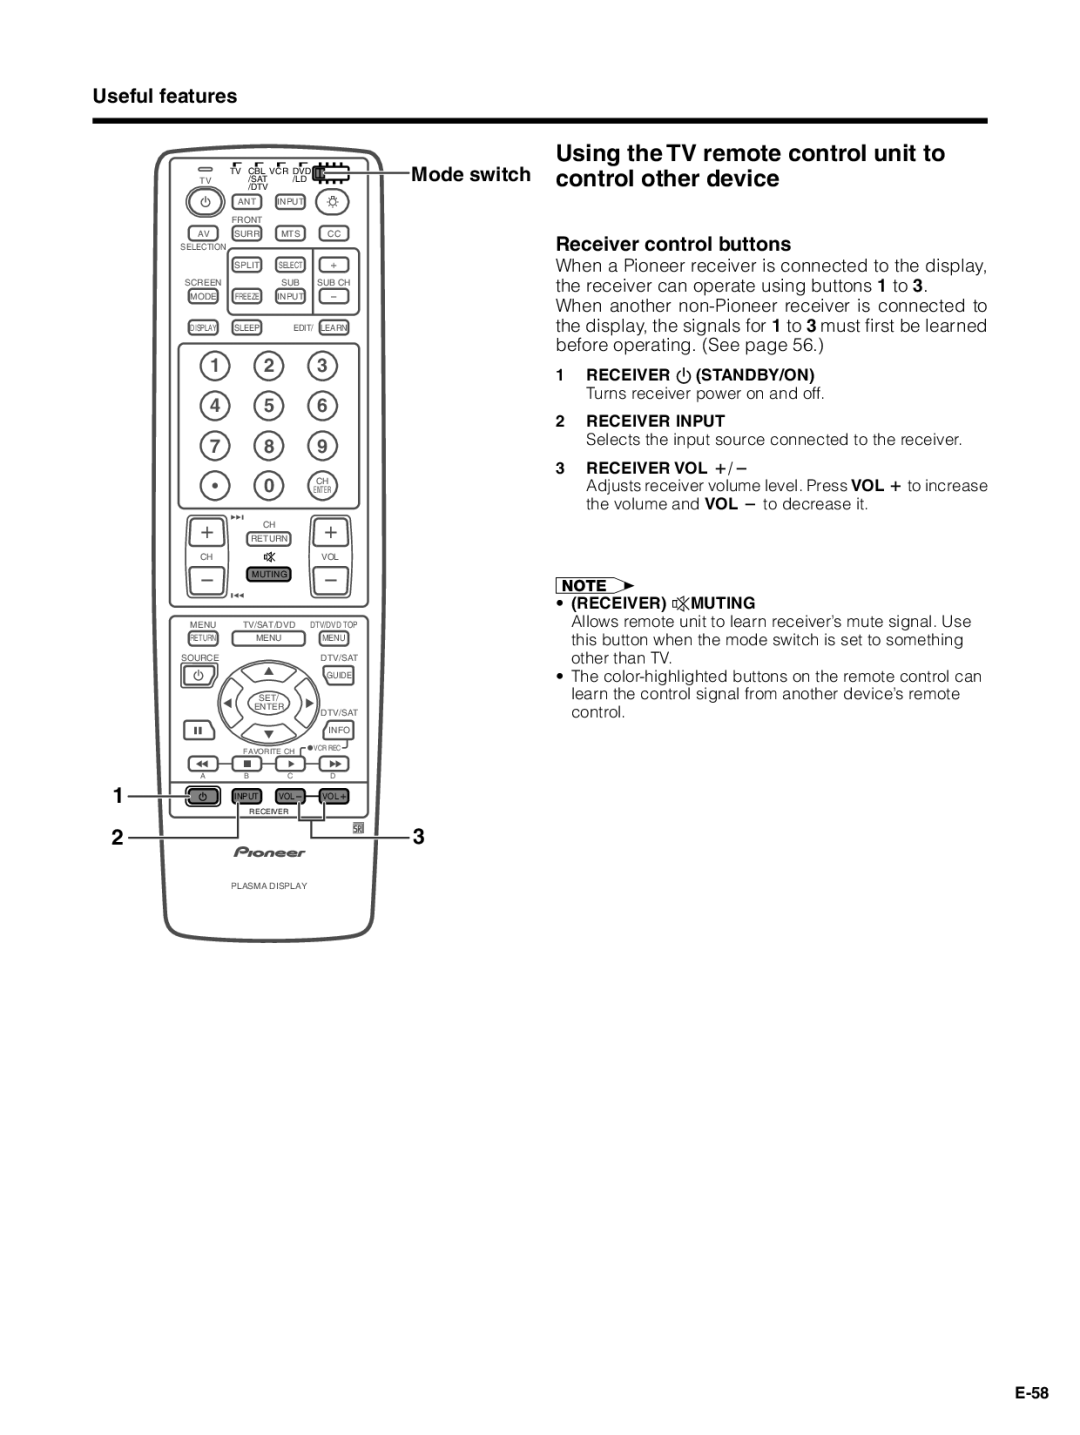 Pioneer PDP-4330HD manual Receiver control buttons, Receiver a STANDBY/ON Turns receiver power on and off, Receiver Input 